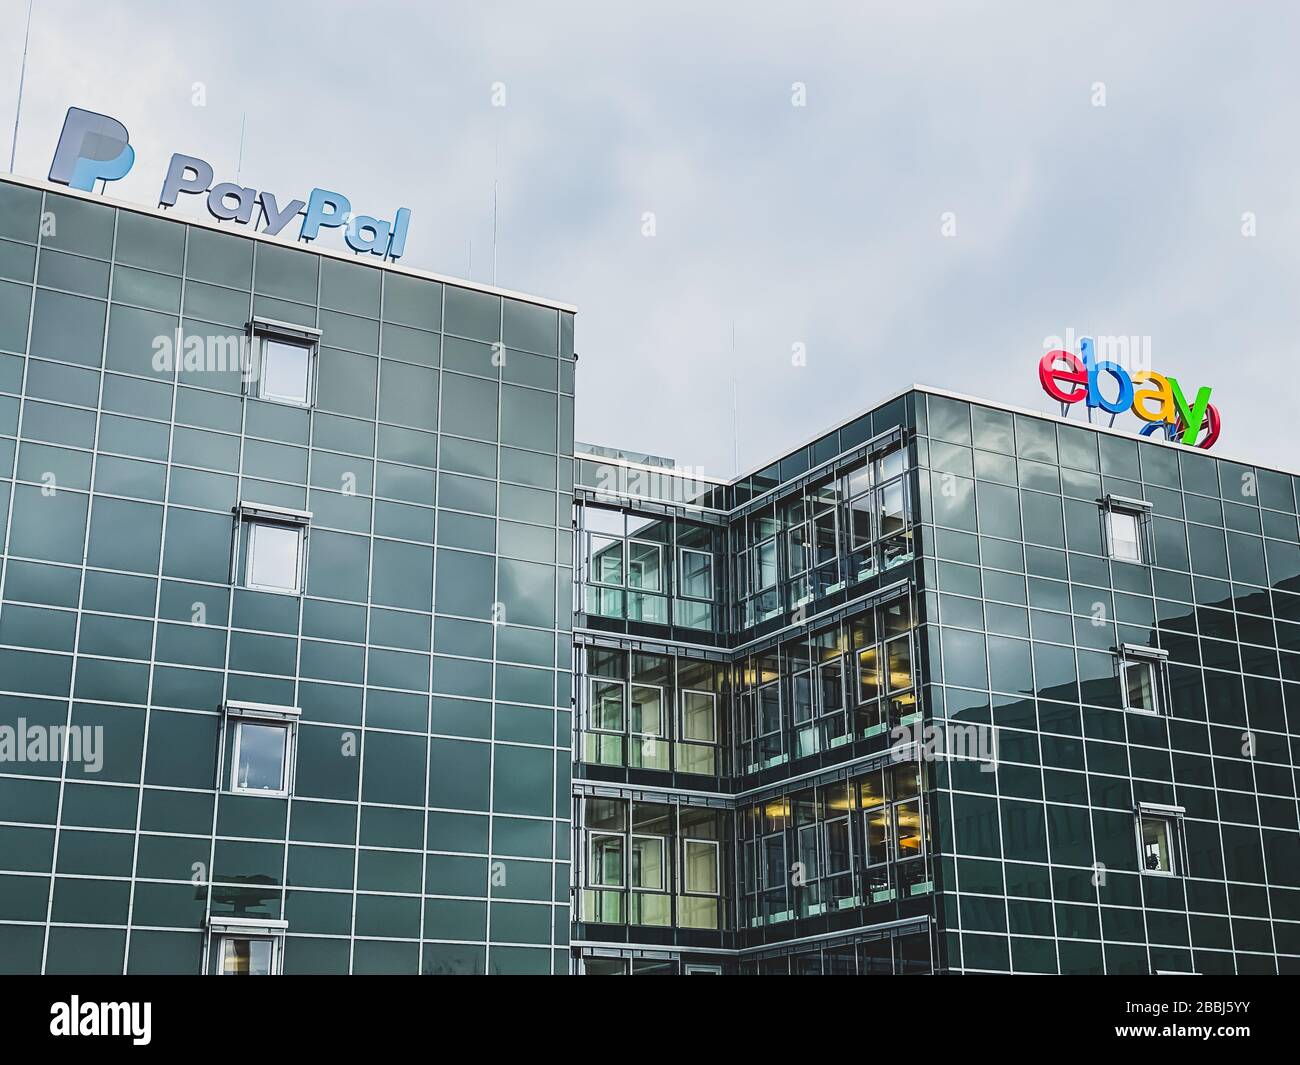 eBay American multinational e-commerce corporation and PayPal American company operating online payments system logo at the companies office building Stock Photo